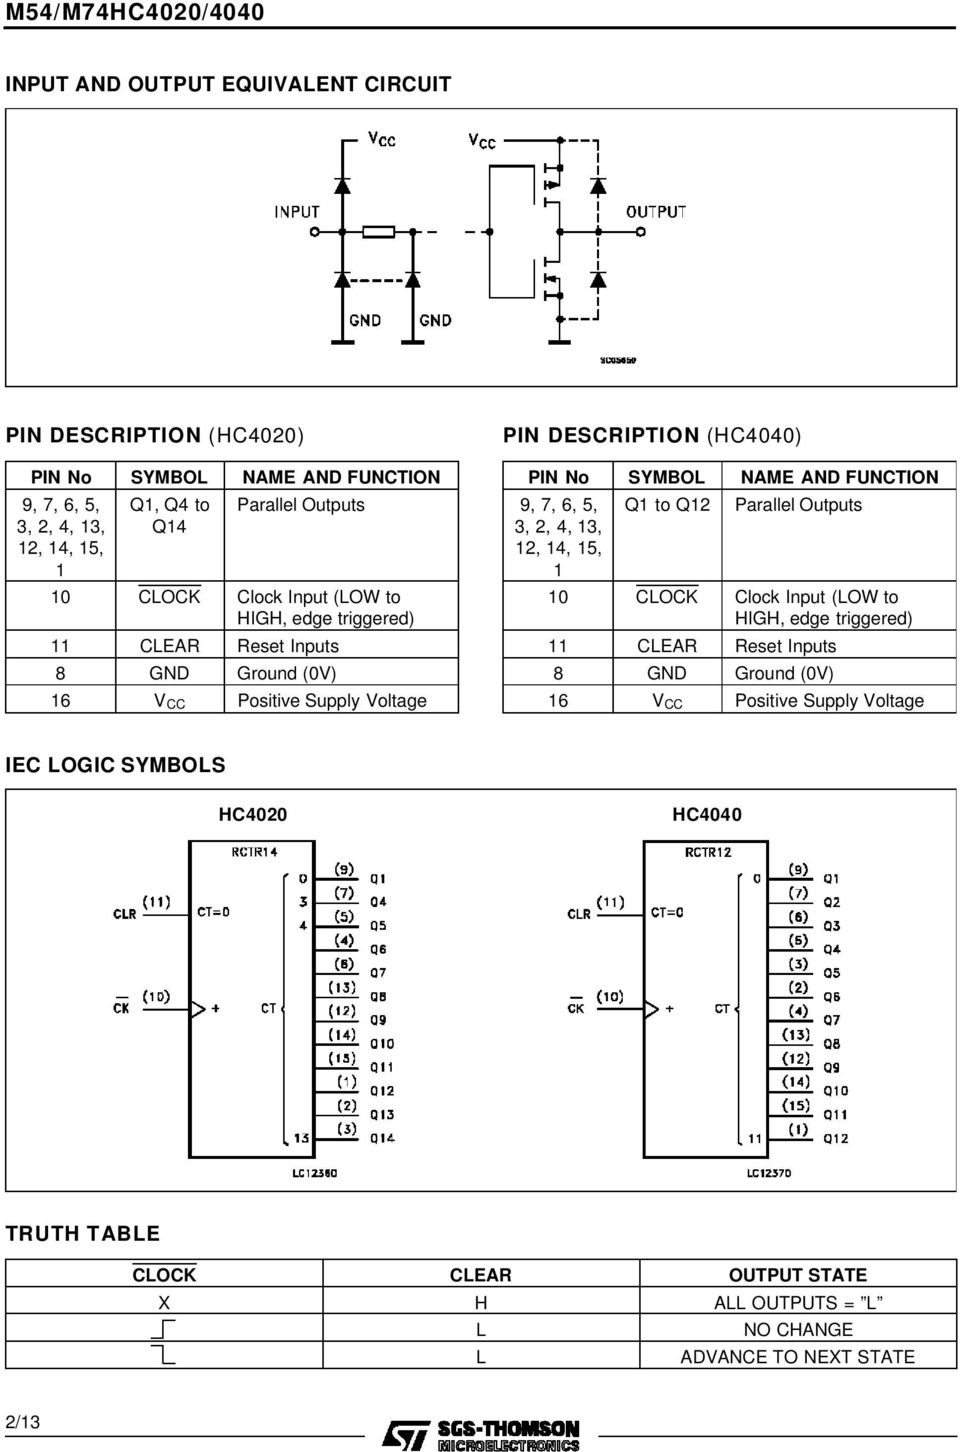 No SMBOL NAME AND FUNCTION 9, 7, 6, 5, 3, 2, 4, 13, 12, 14, 15, 1 Q1 to Q12 Parallel Outputs 10 CLOCK Clock Input (LOW to HIGH, edge triggered) 11 CLEAR Reset Inputs 8